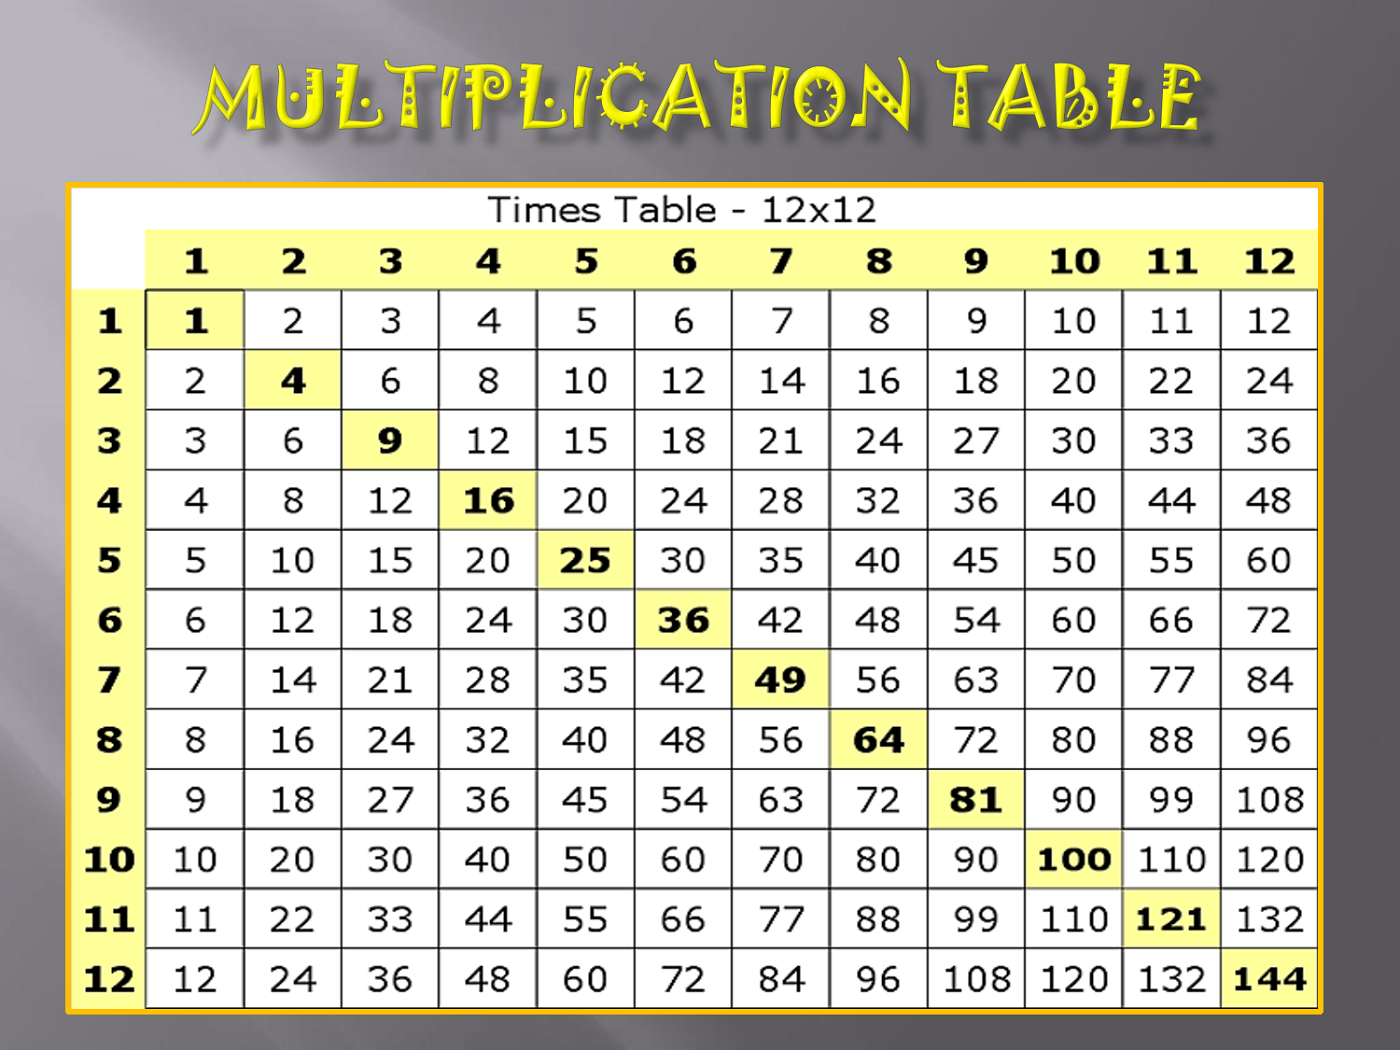 multiply-chart-table-yellow